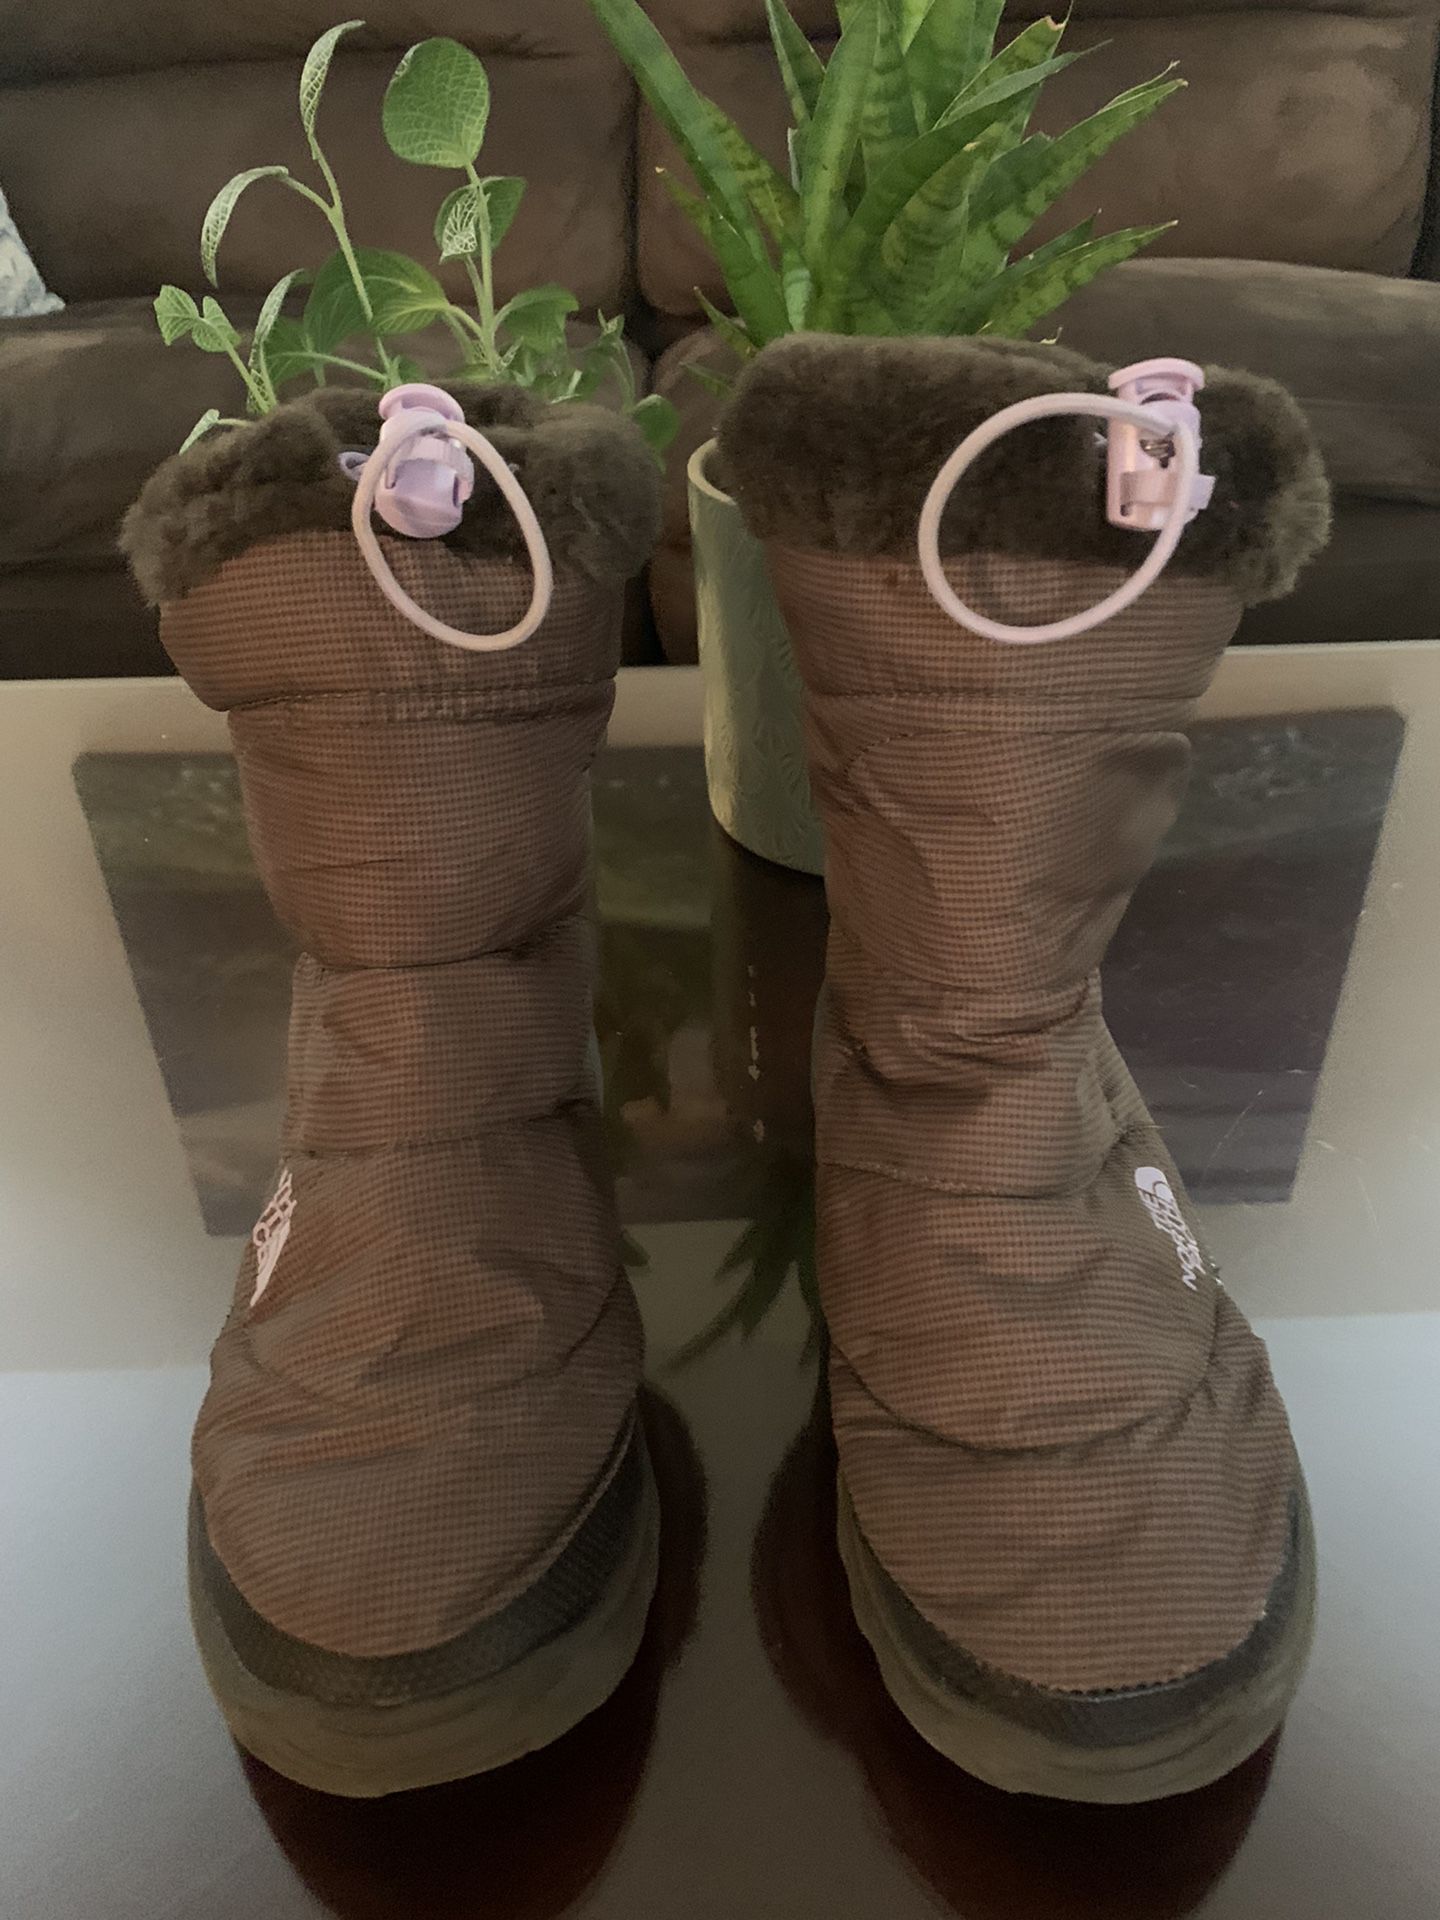 Girls north face boots